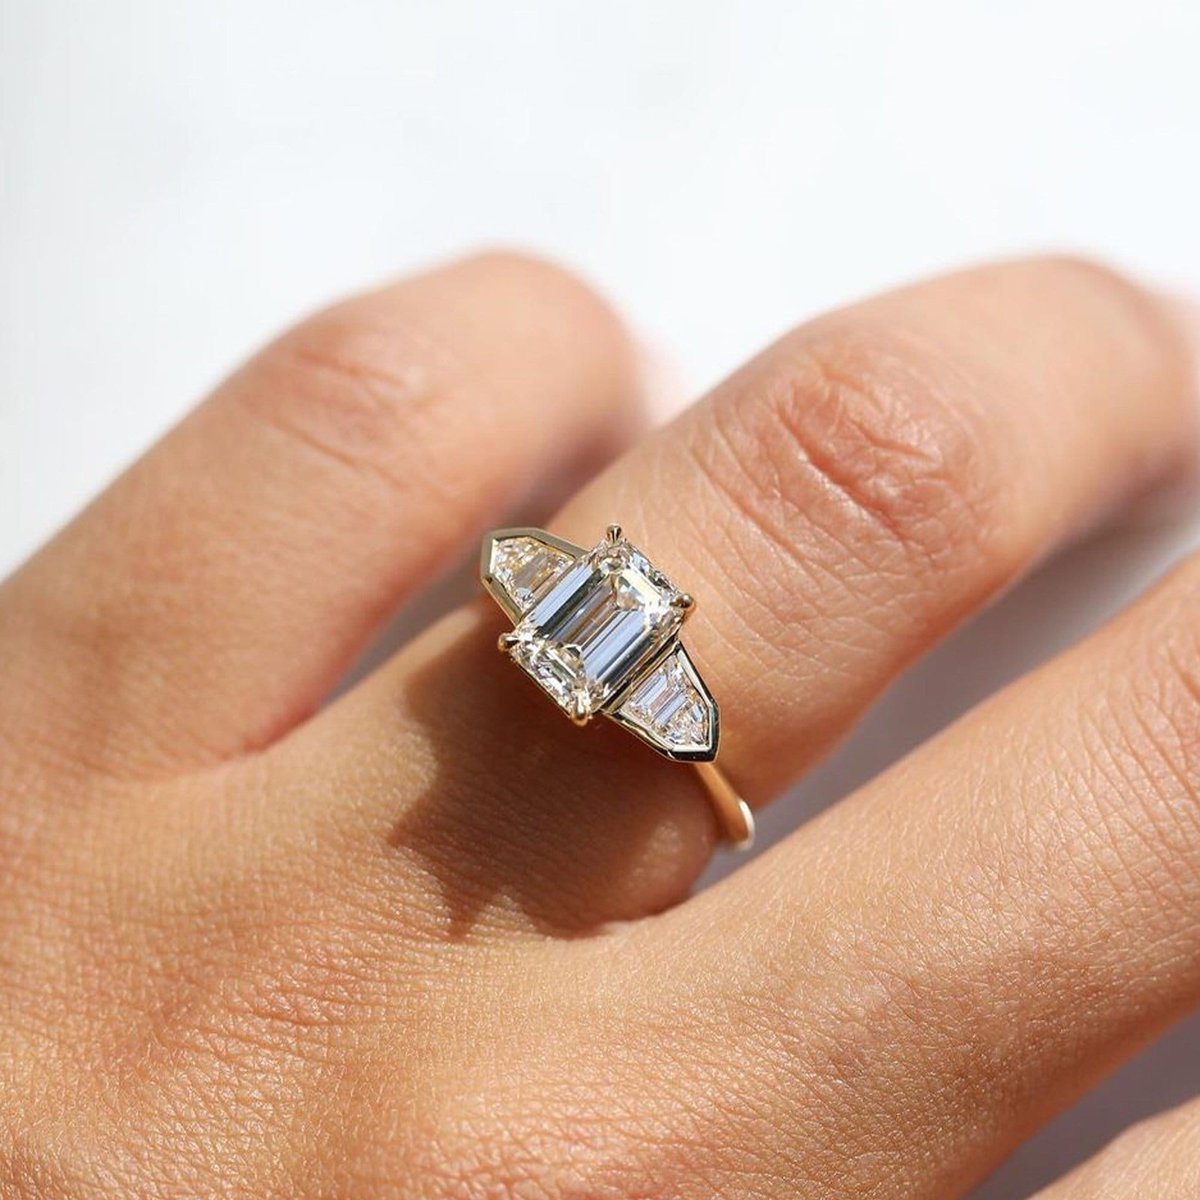 Excited to share the latest addition to my #etsy shop: 2 Ct Emerald Cut Moissanite Engagement Ring Unique Wedding Ring Bezel Setting Ring 14k Gold Women's Ring Modern Anniversary Gift Bridal Ring etsy.me/3Xsu35J #rosegold #recycledmetal #emerald #gifther